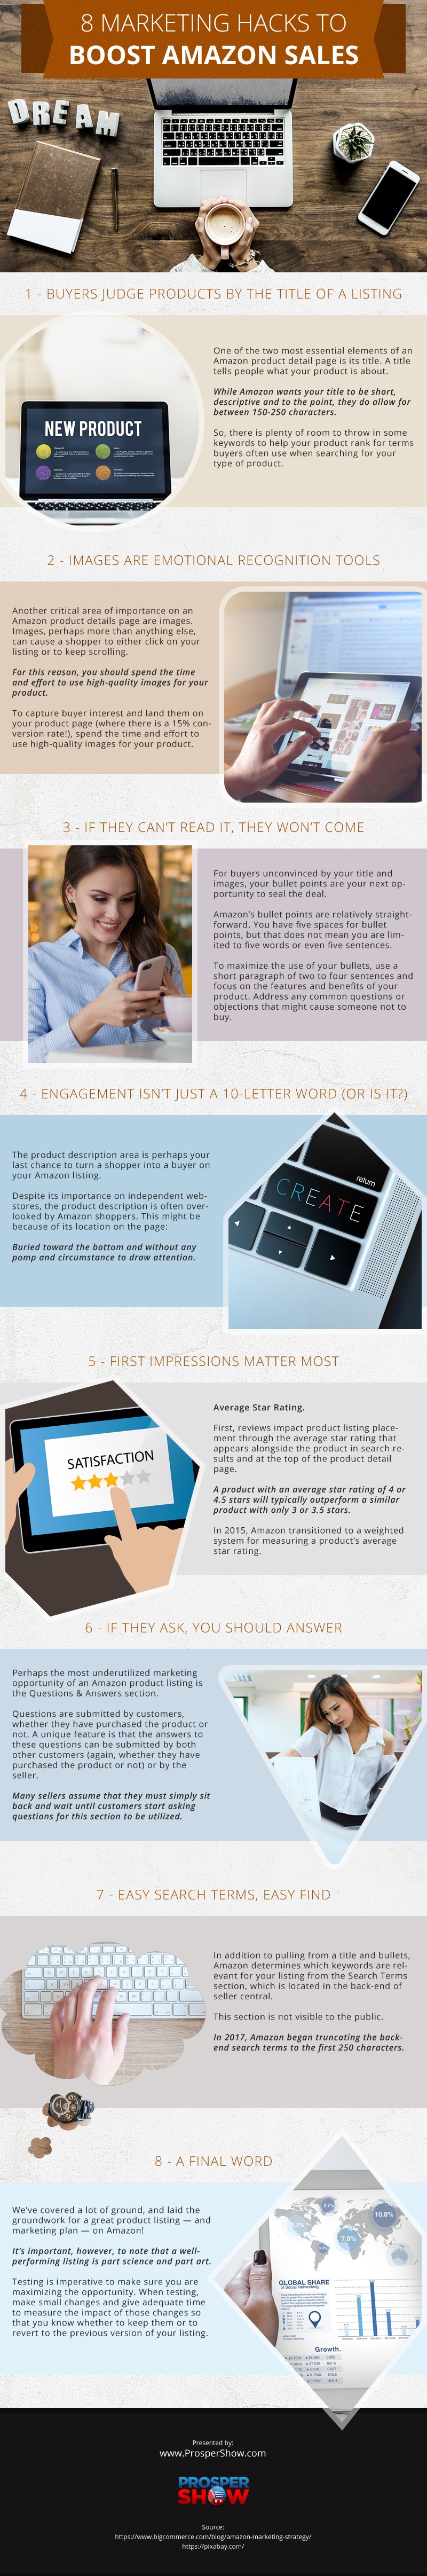 Marketing-Hacks-to-Boost-Sales Infographic